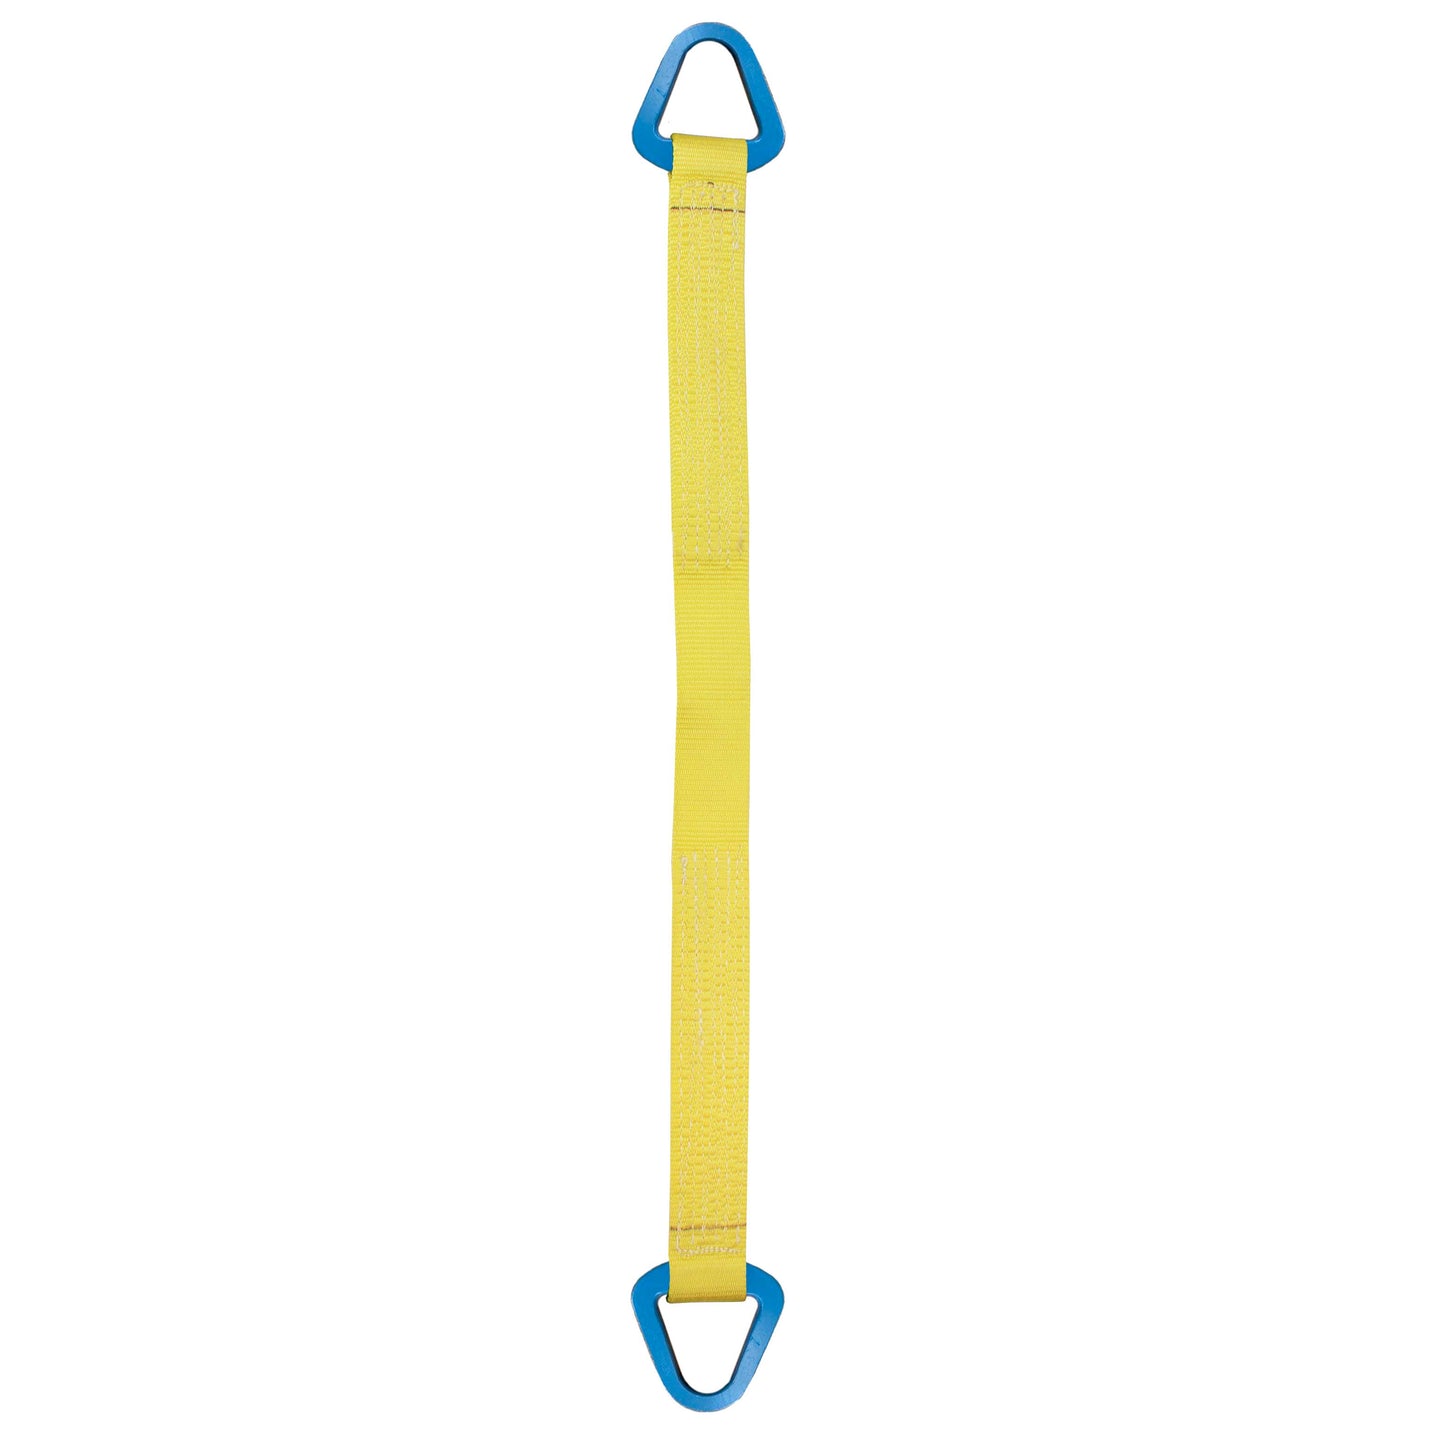 Nylon Lifting Sling Triangle 6 inch x 16 foot 2ply image 1 of 2